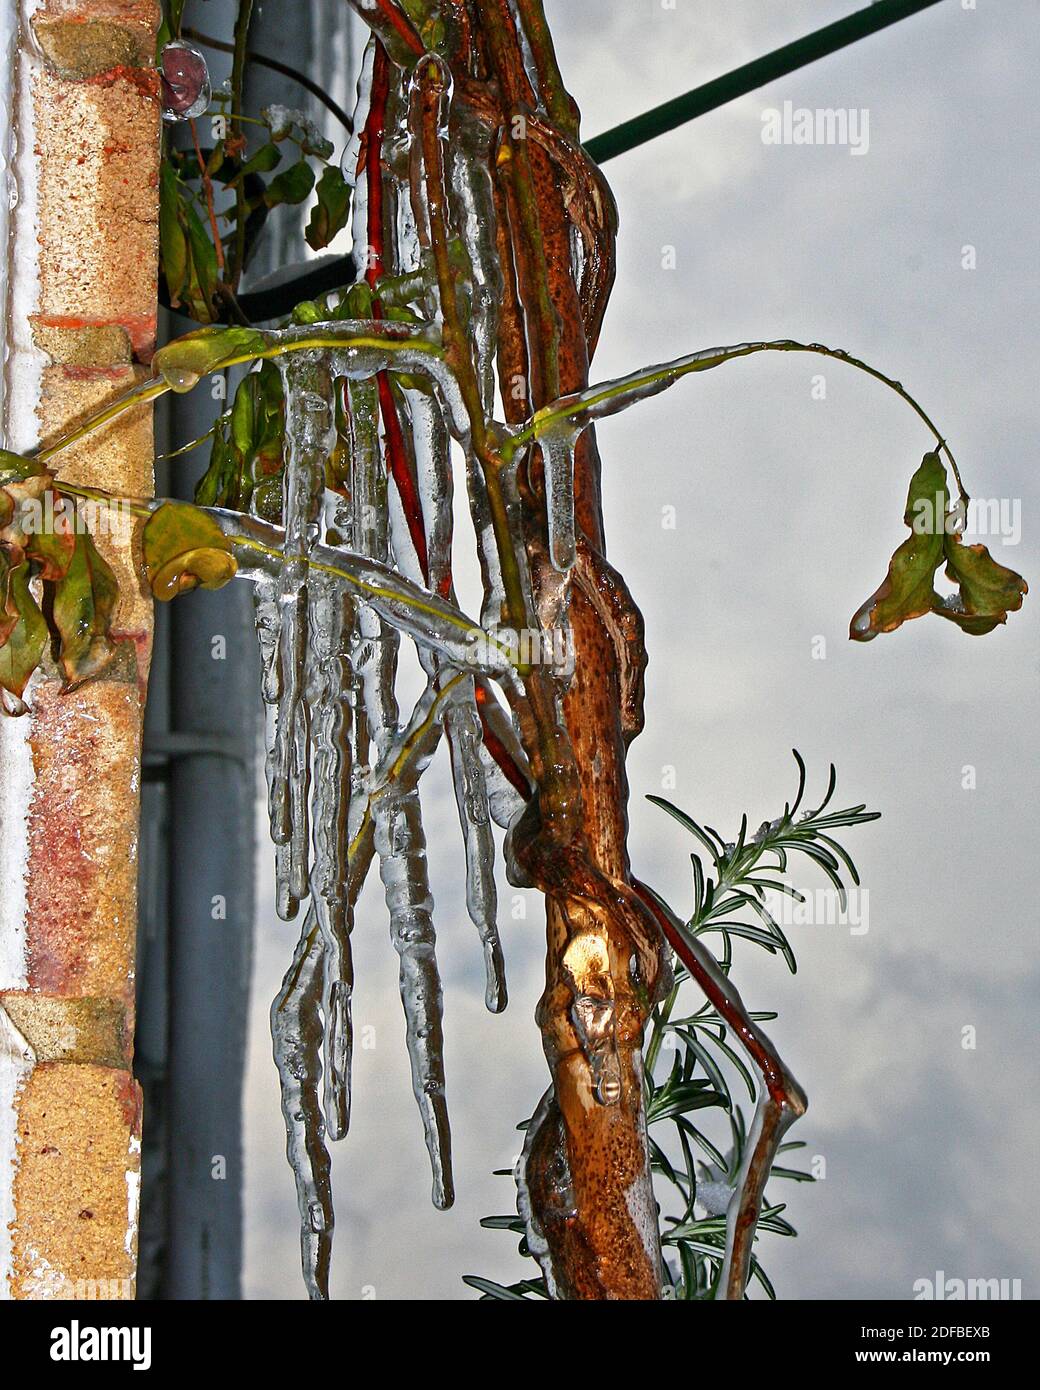 Freezing weather brings ice and icicles to England. Here the ice has encased the branches of a small tree. However after the thaw it was found healthy Stock Photo